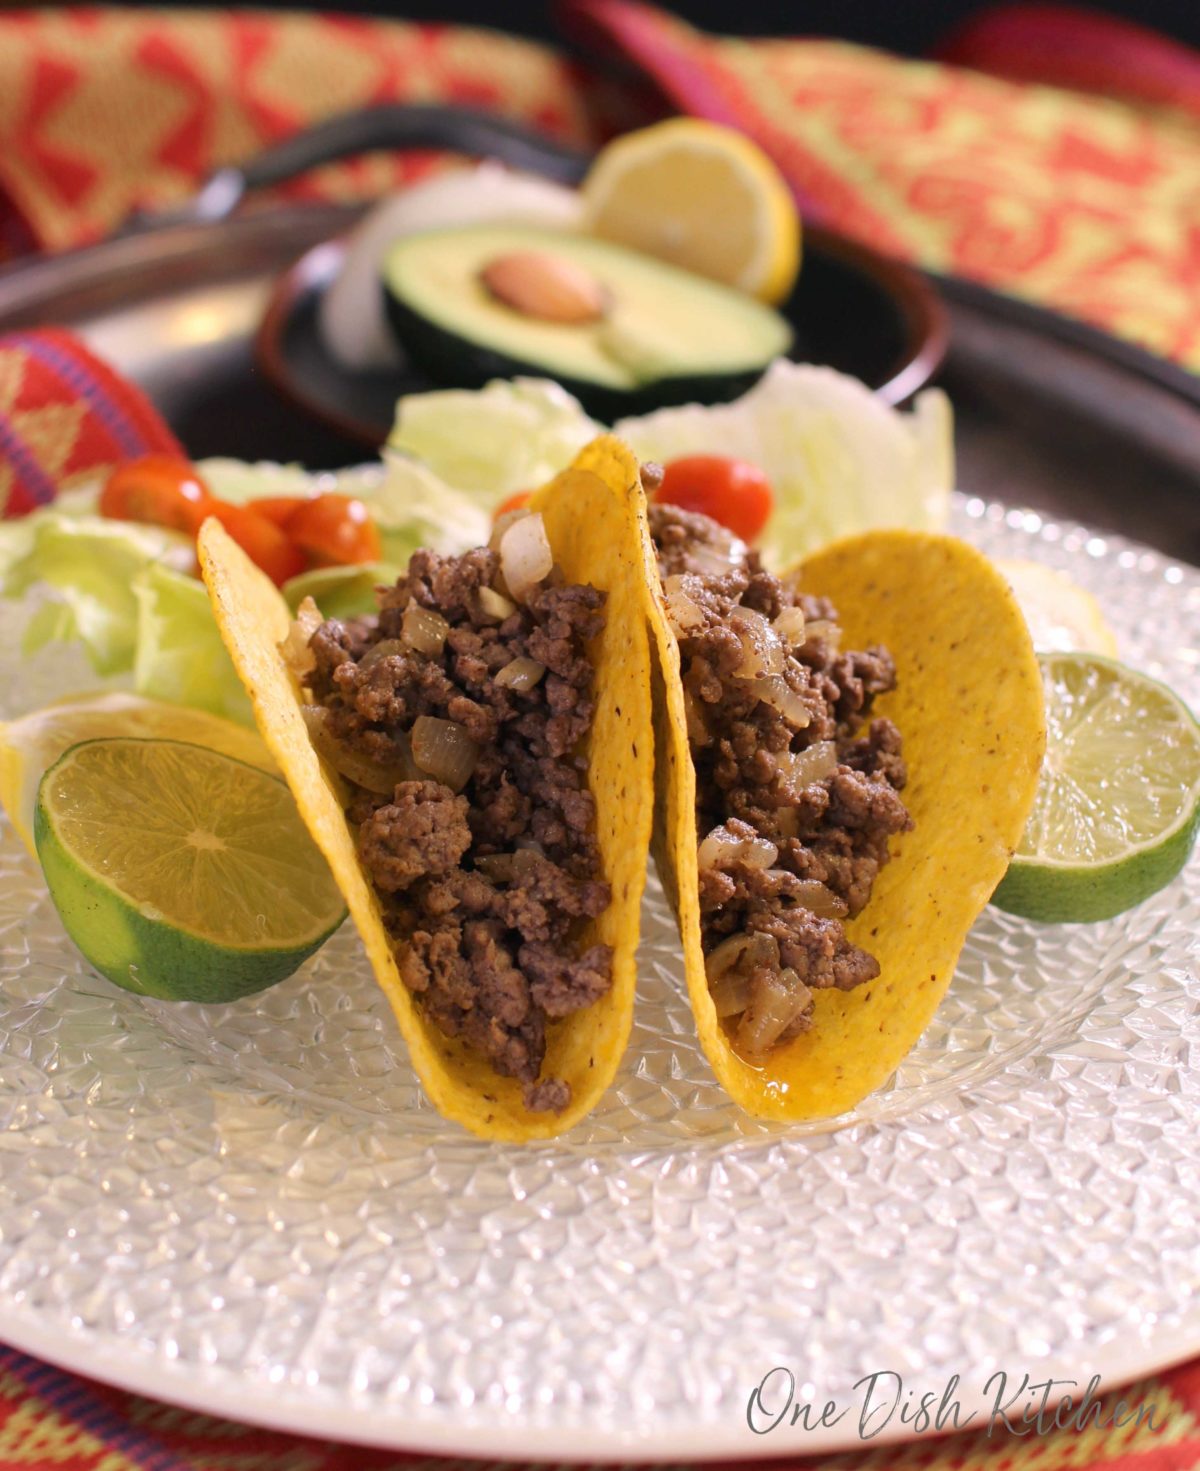 Two taco shells on a plate filled with ground beef and onions with lime halves on both sides of the tacos and a small salad on a metal tray with small plate of half of an avocado and half of a lemon in the background.